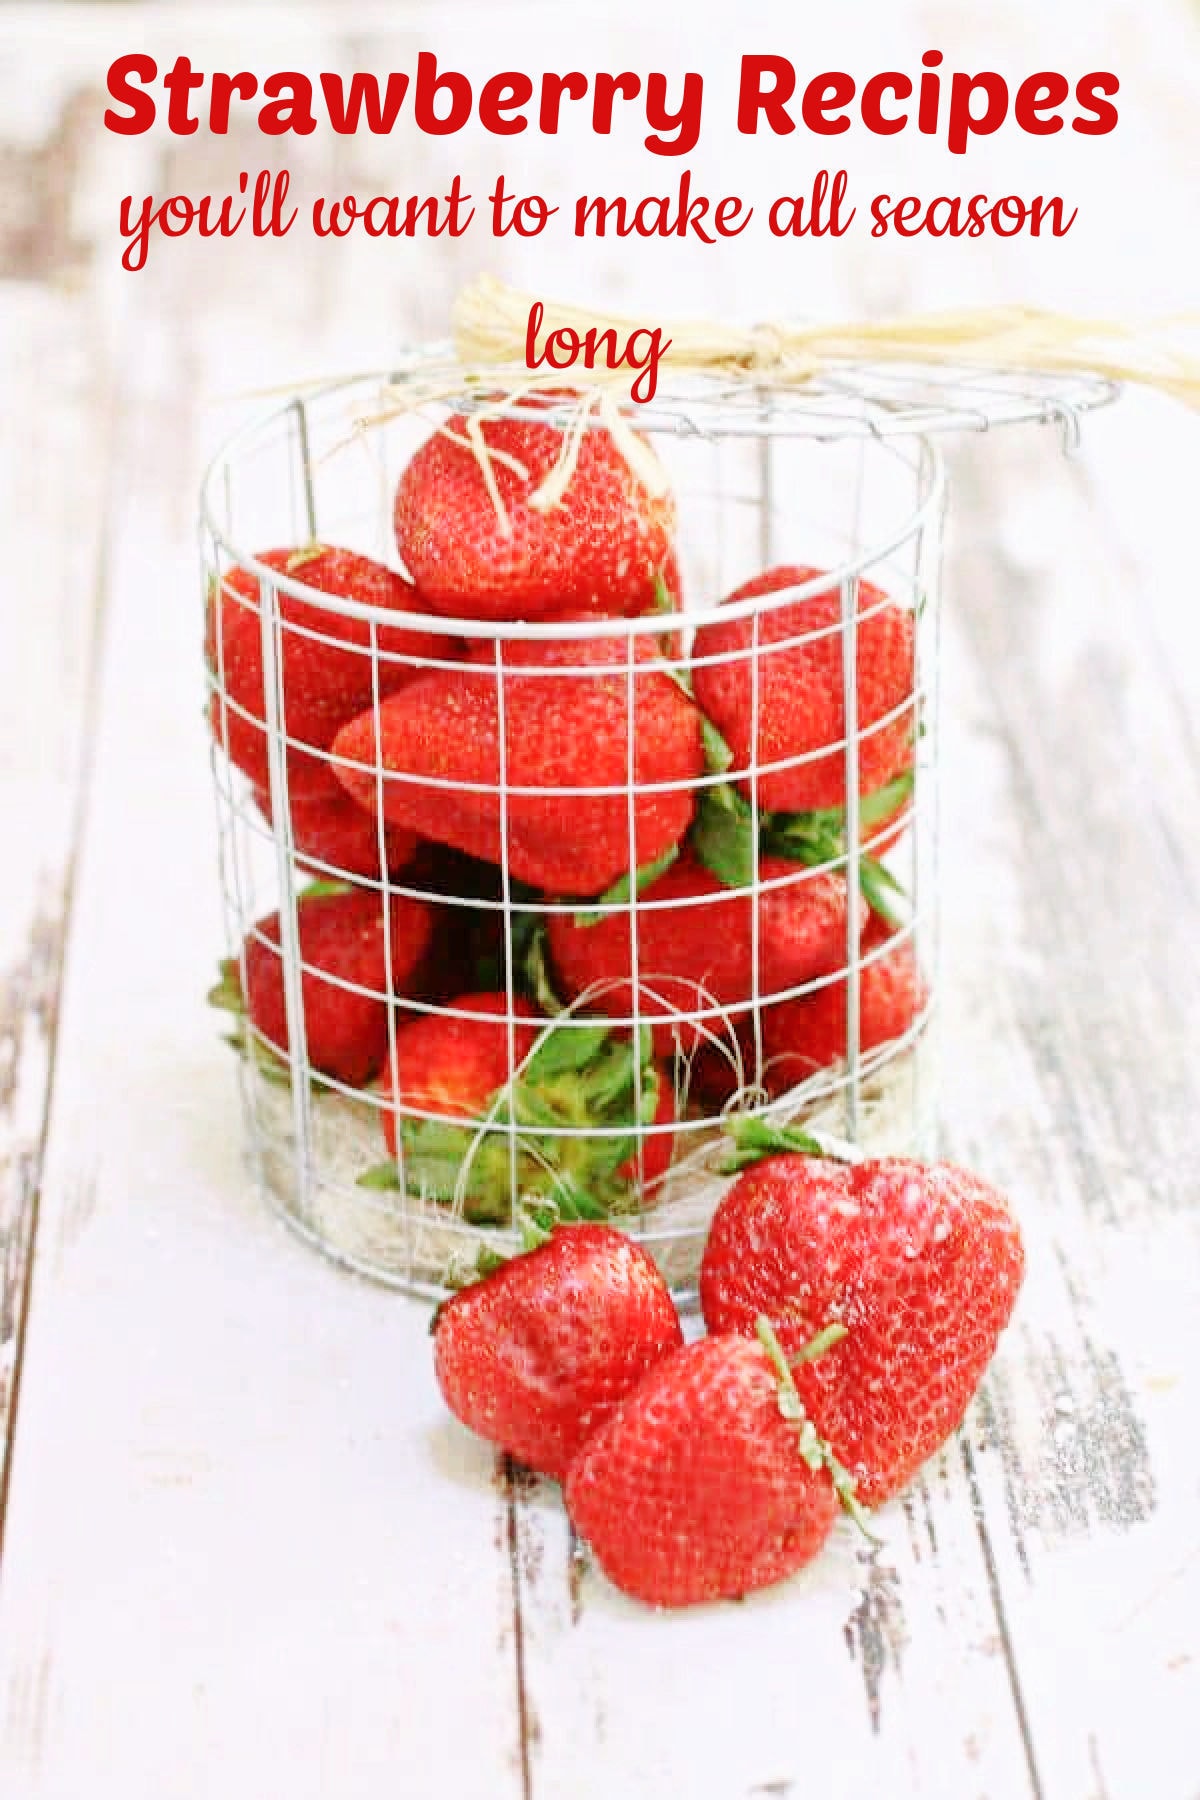 Fresh strawberries in a wire basket with title text overlay.